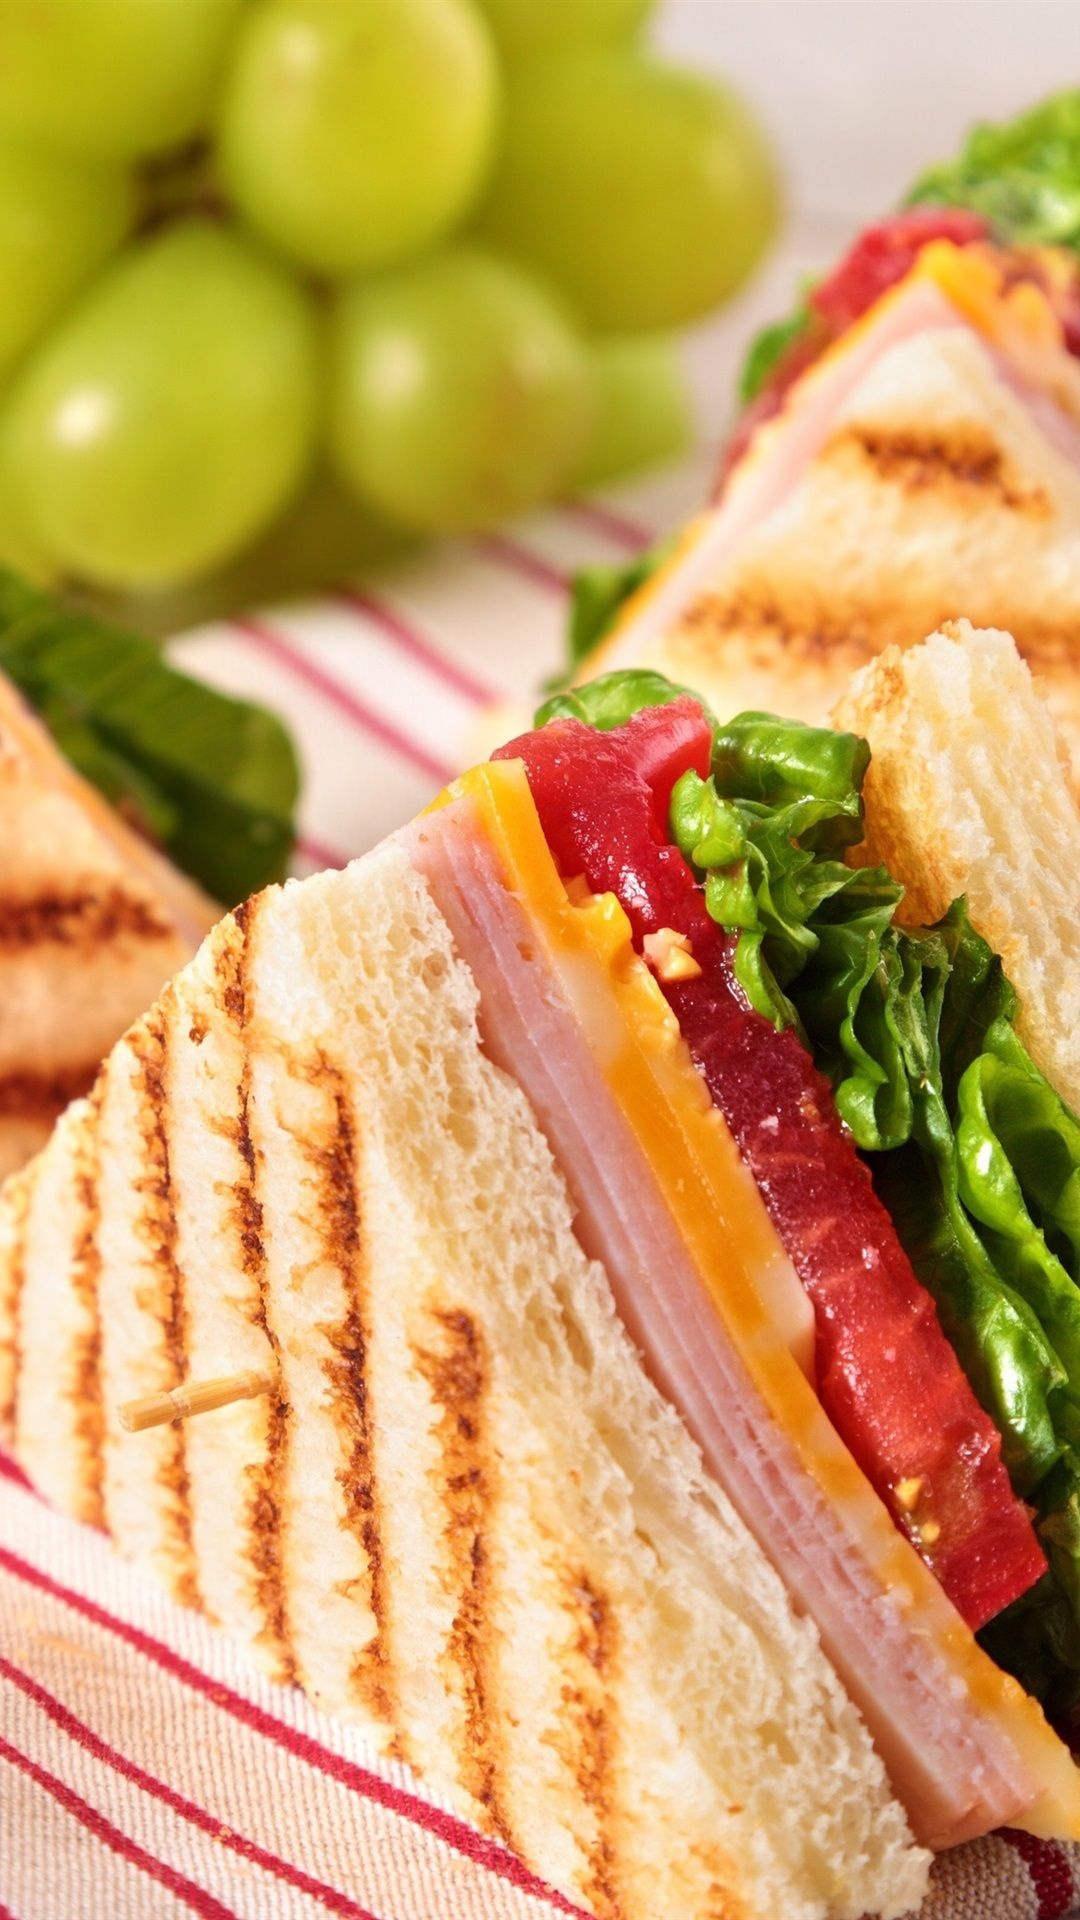 Sandwich: The bread is cut horizontally and filled with deli ingredients. 1080x1920 Full HD Background.